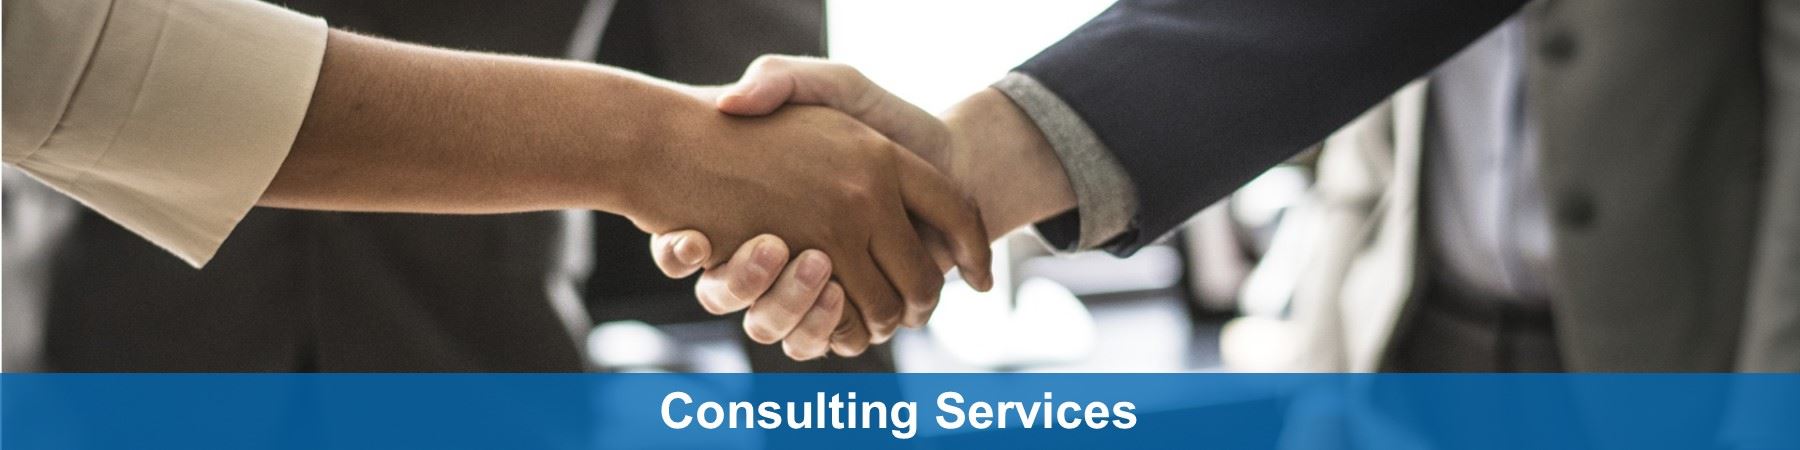 Consulting Services - two people shaking hands